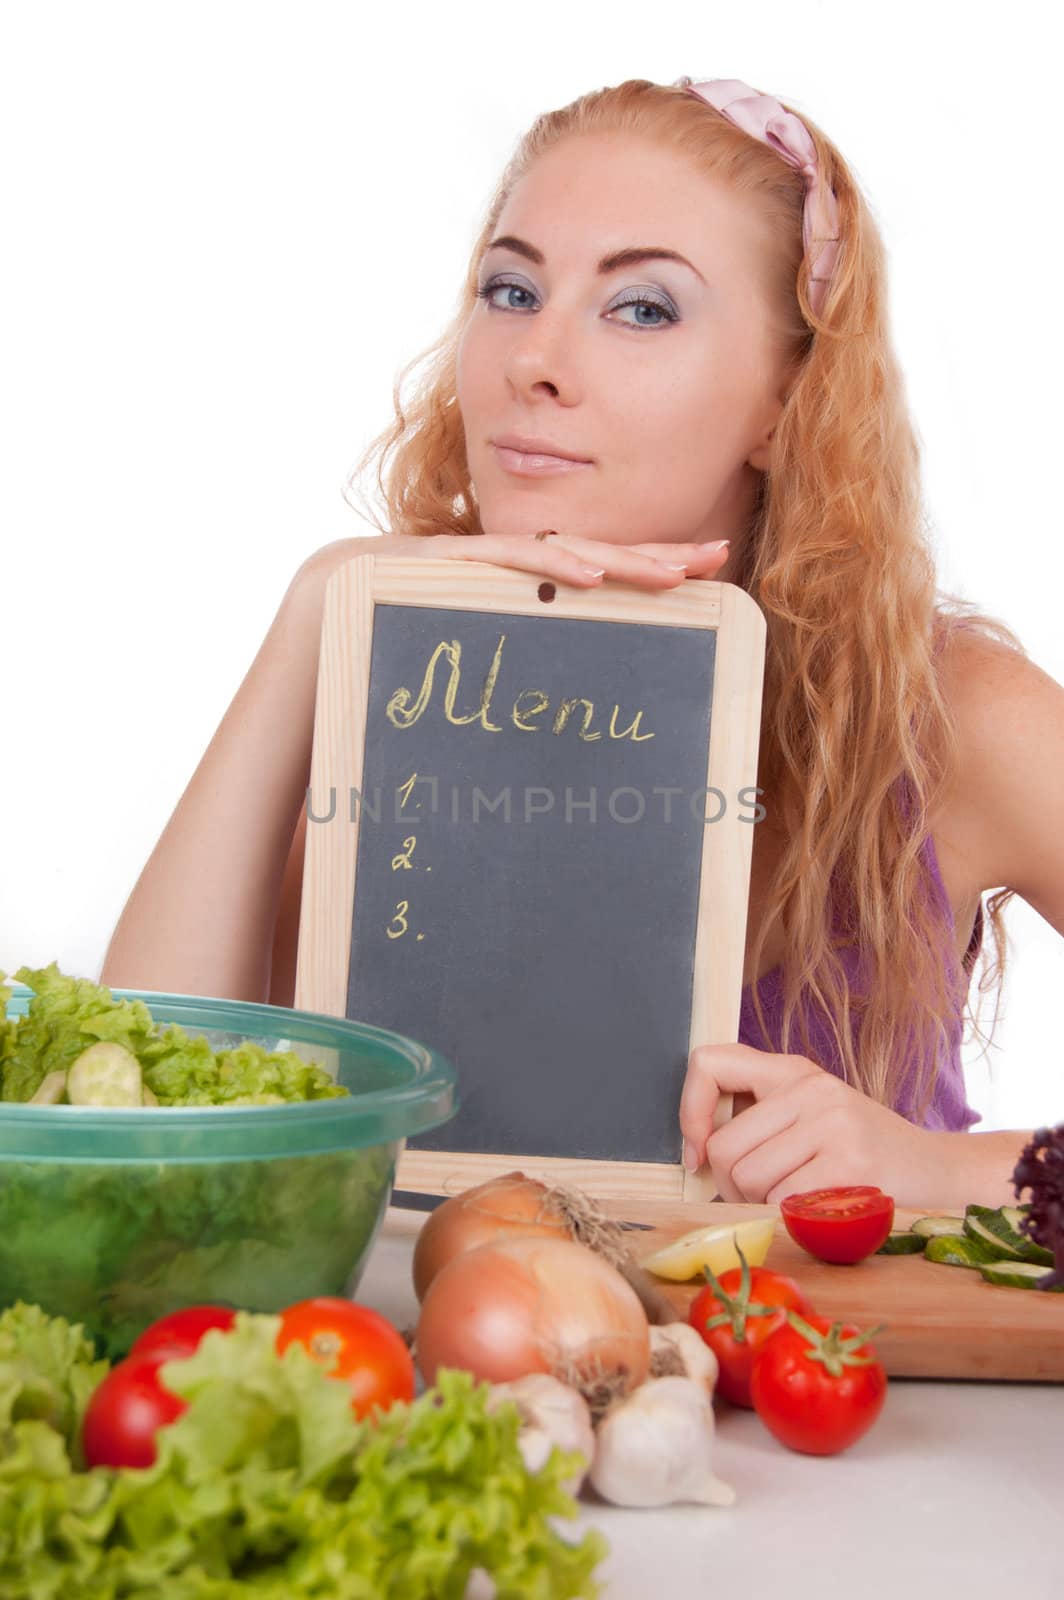 Woman with menu board and vegetables by Angel_a